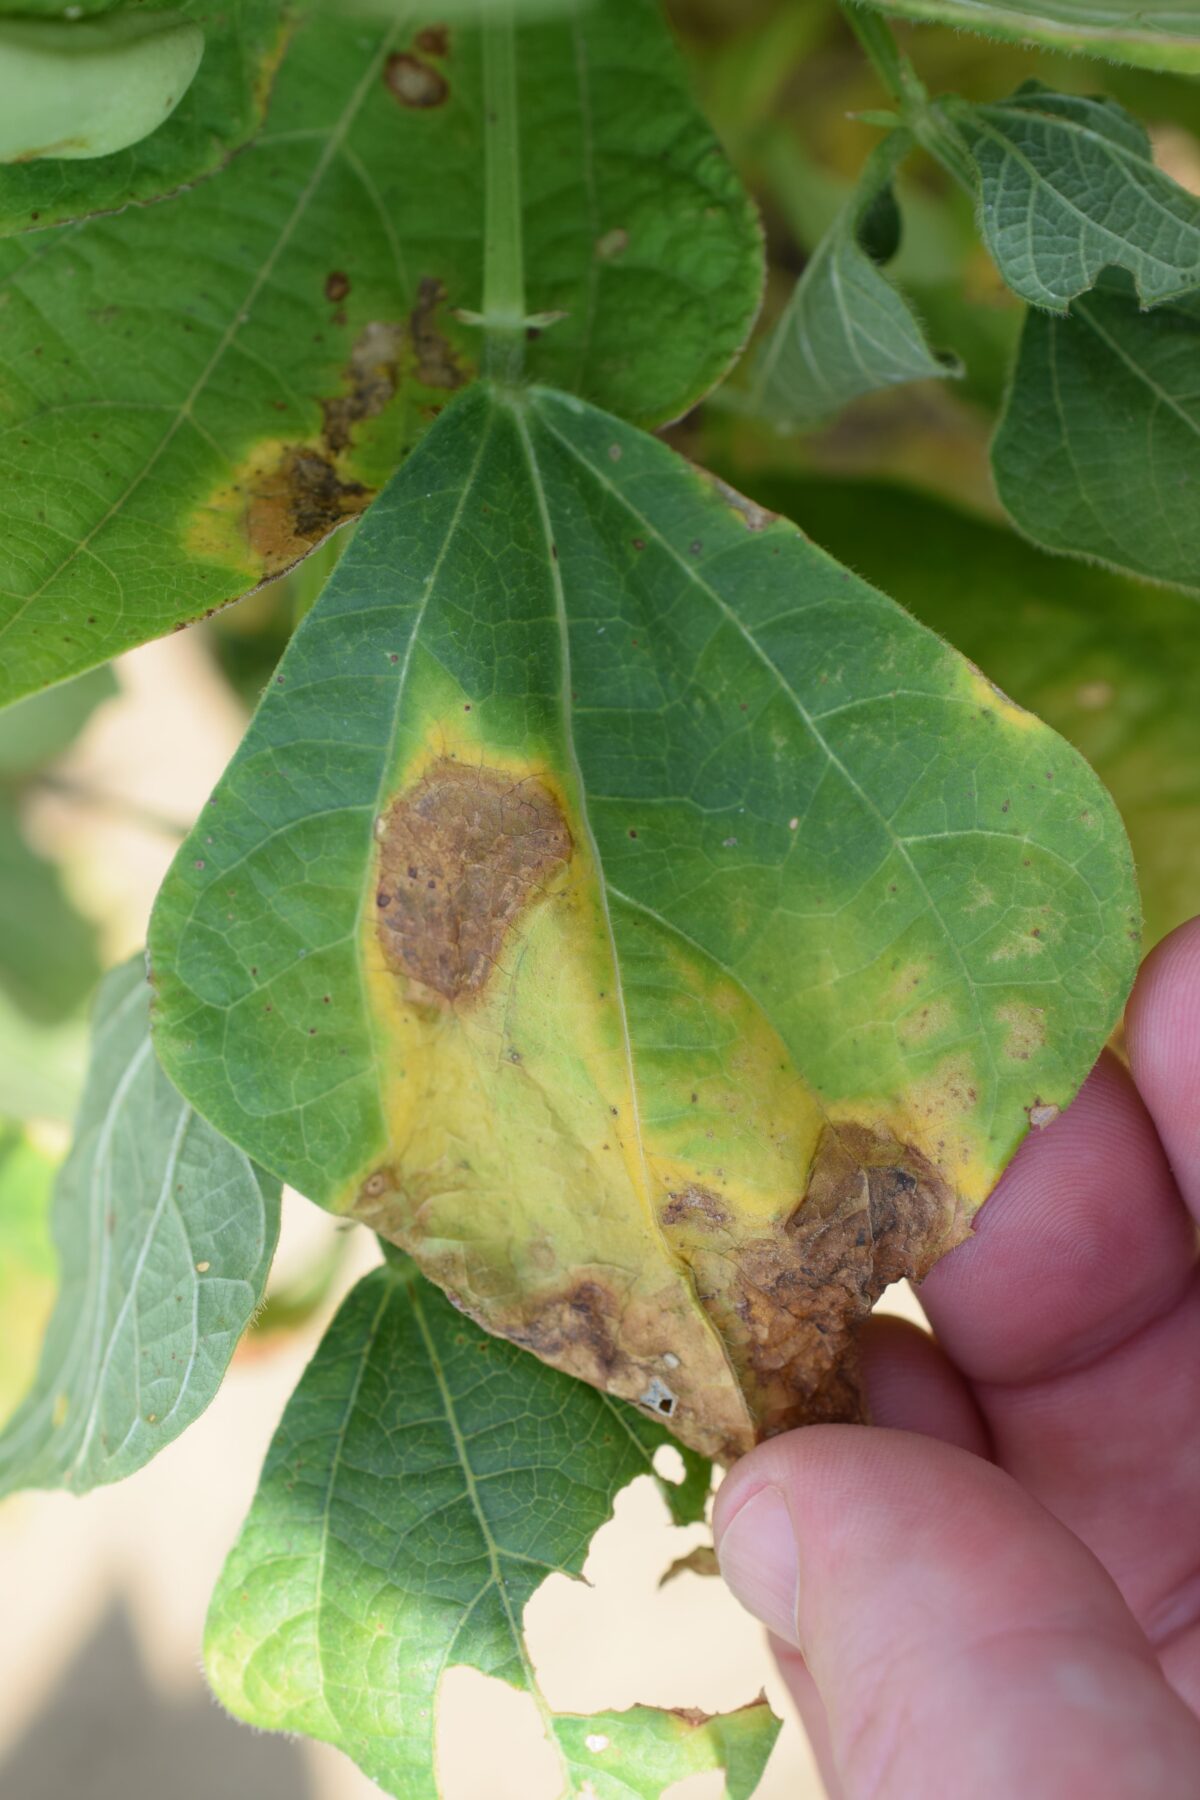 Bacterial brown spot on a dry bean leaf in which there are large dark brown necrotic spots surrounded by broad yellow borders and little brown specks spread across the leaf